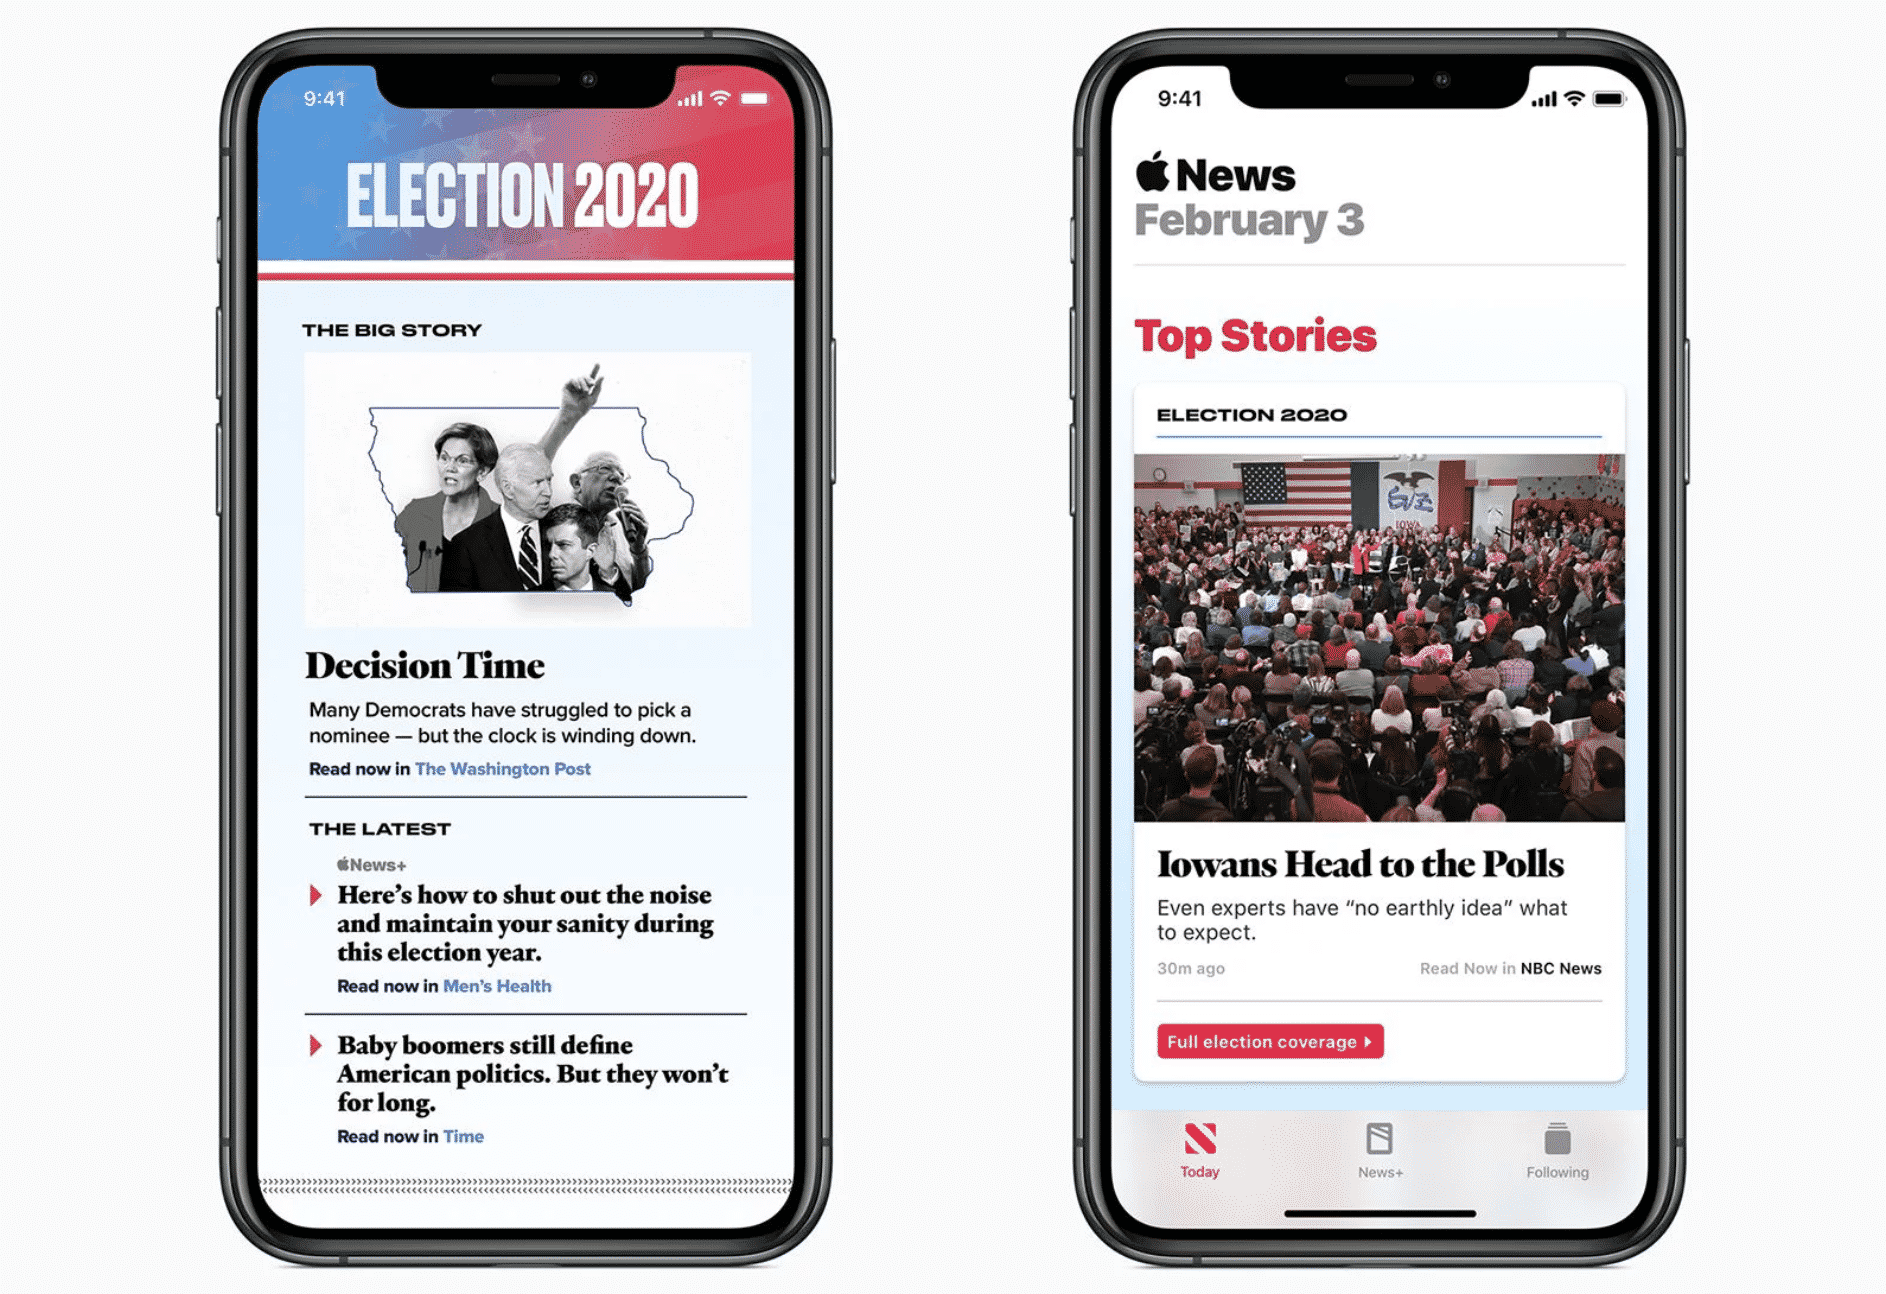 2020 US Presidential Election Special Coverage Headed to Apple News